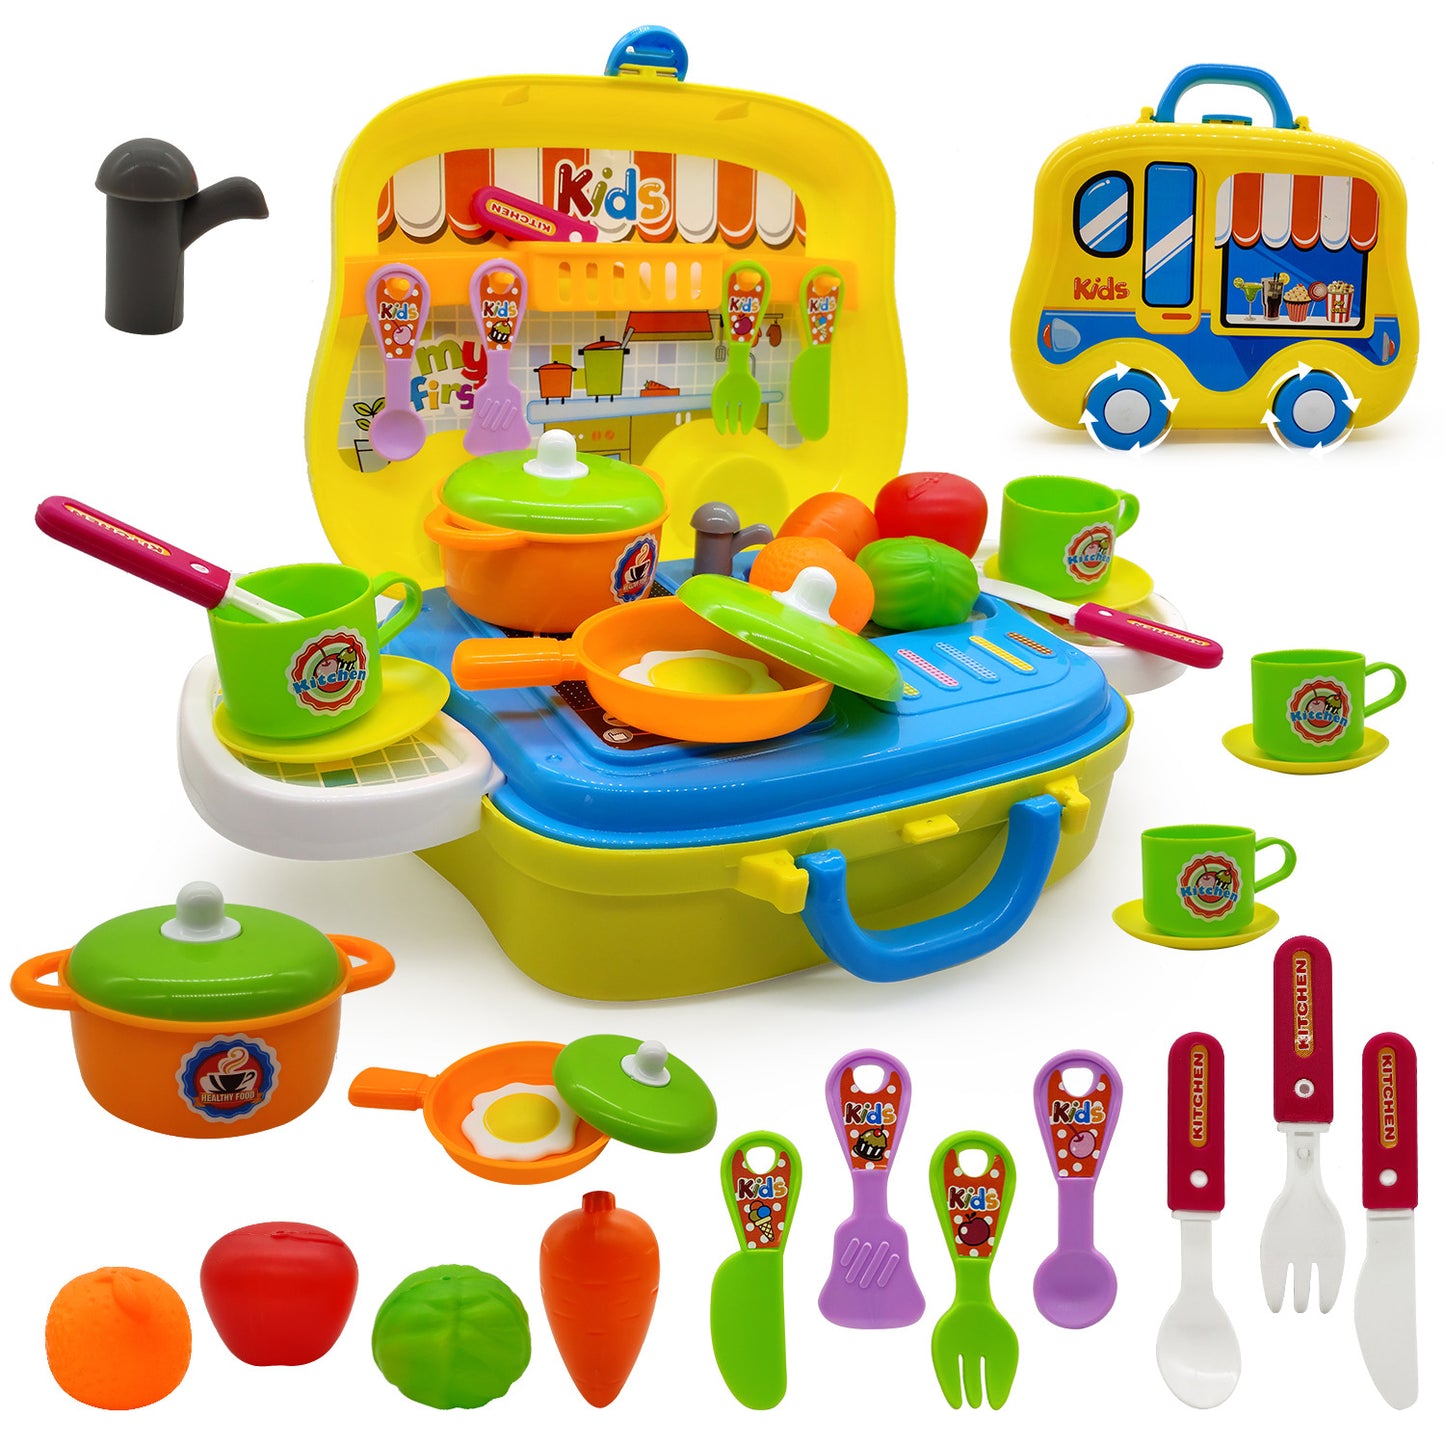 NHR Plastic Pretend Play Kitchen Food Set with Wheel Suitcase for Girls (26 Pieces, Multicolor)